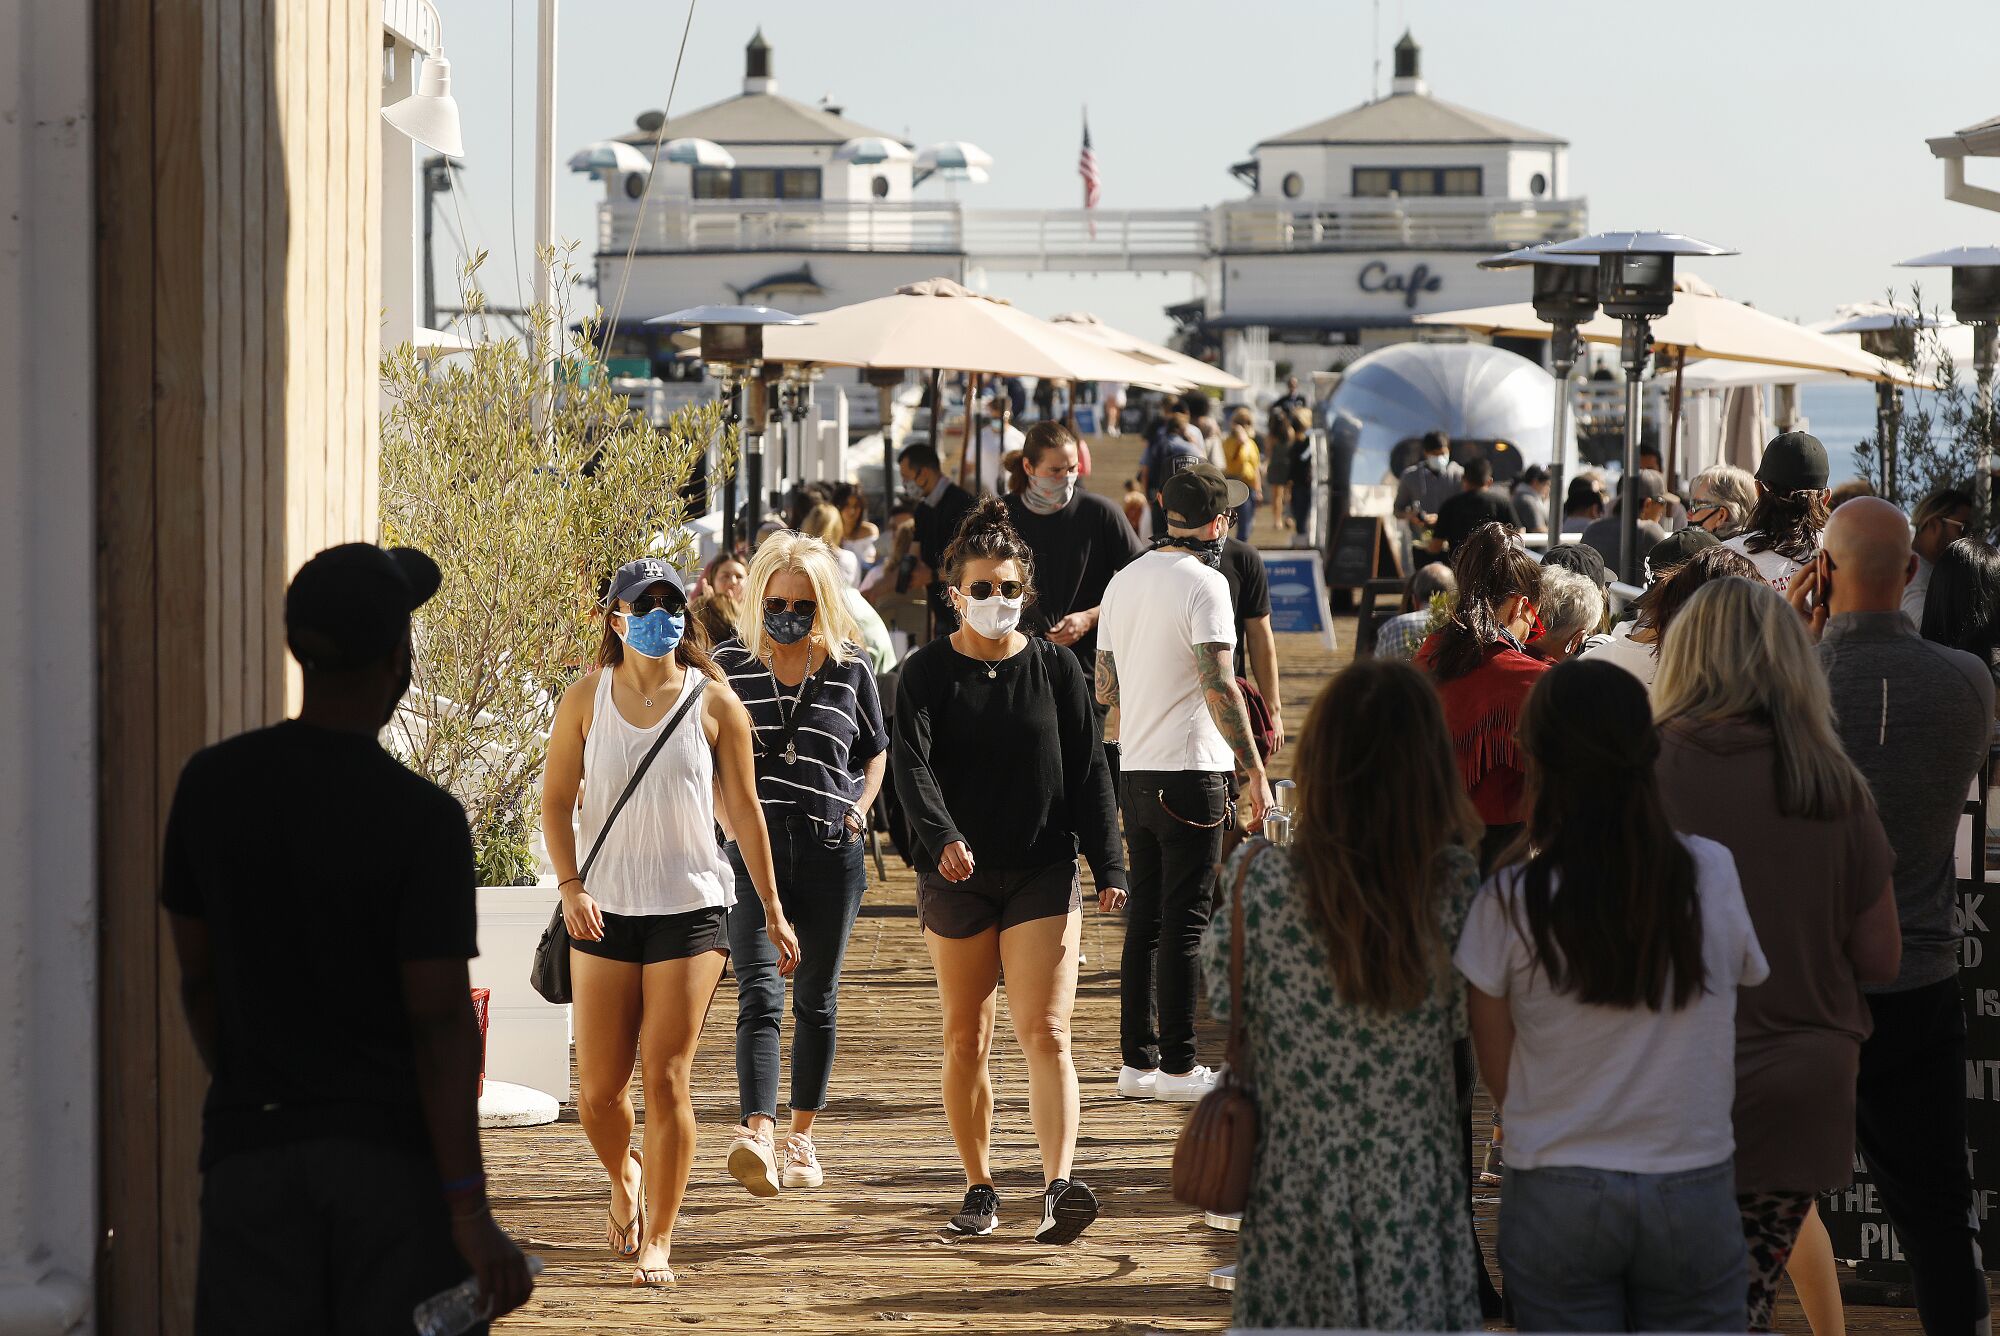 A crowd of visitors in masks on a pier